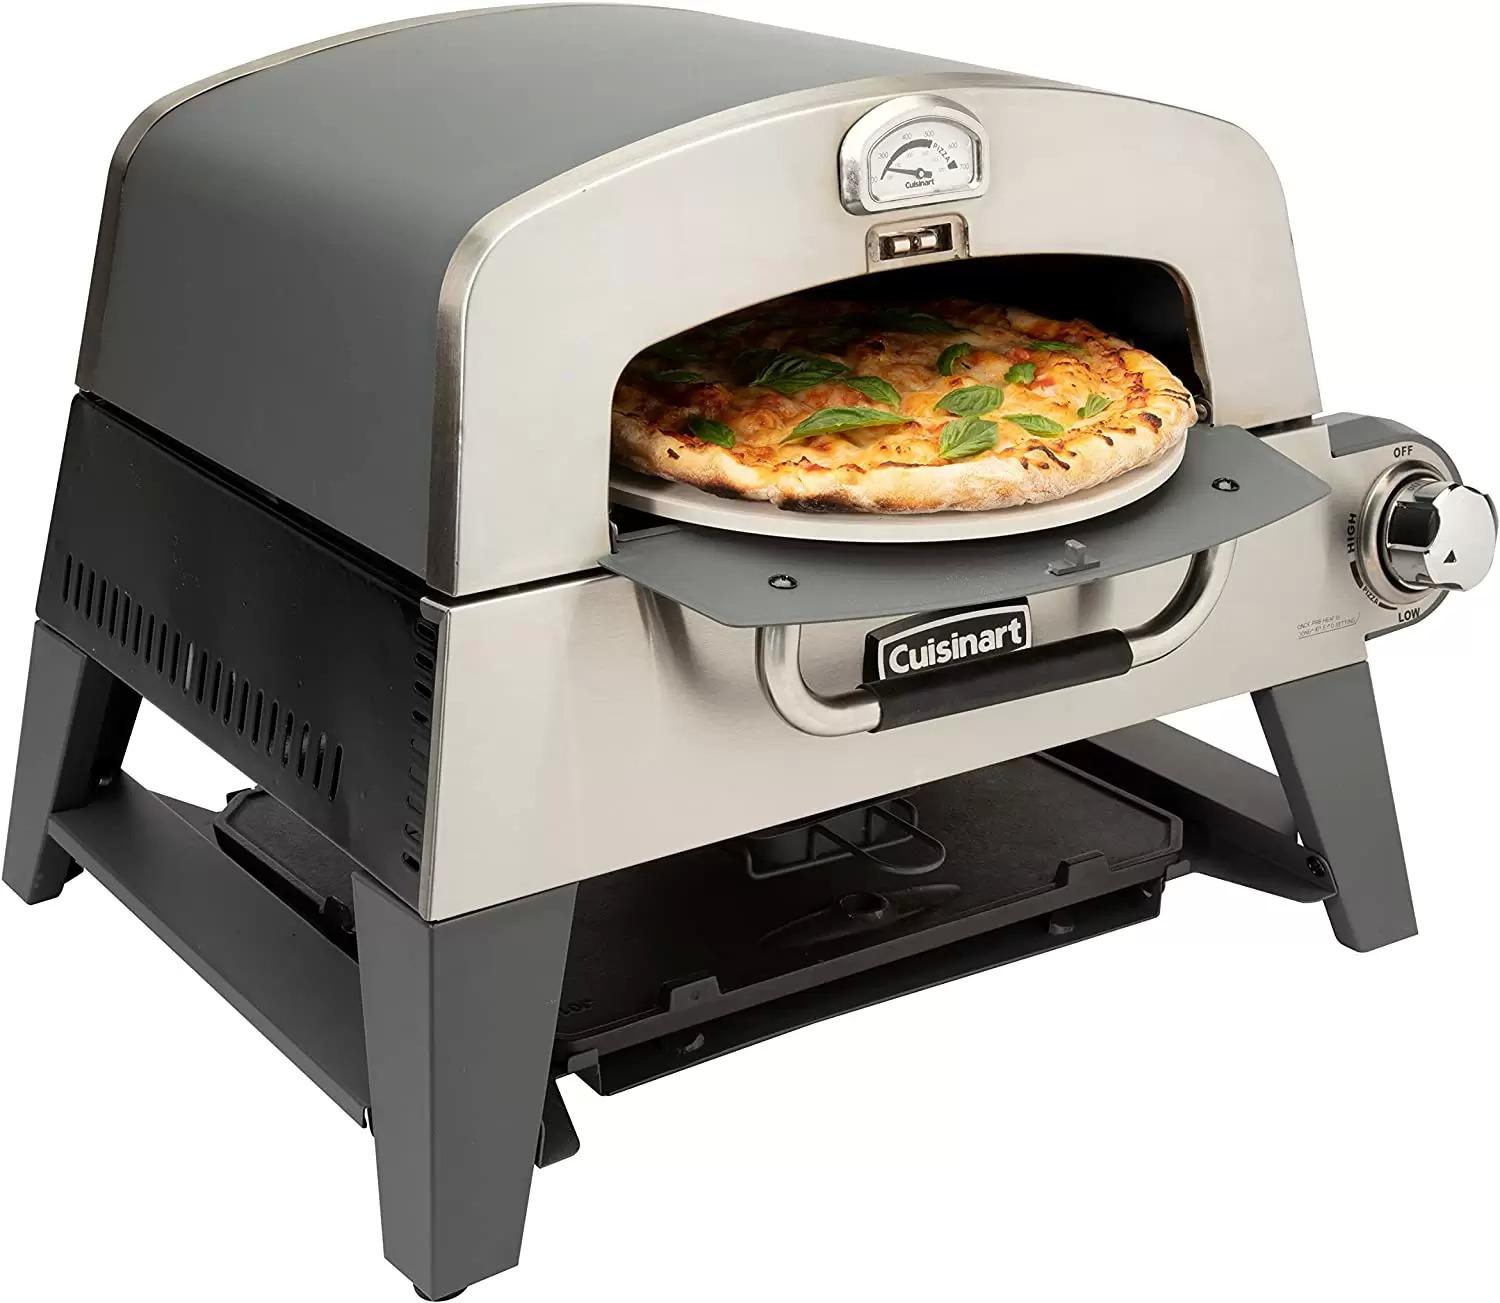 Cuisinart 3-in-1 Pizza Oven Griddle and Grill CGG-403 for $147 Shipped